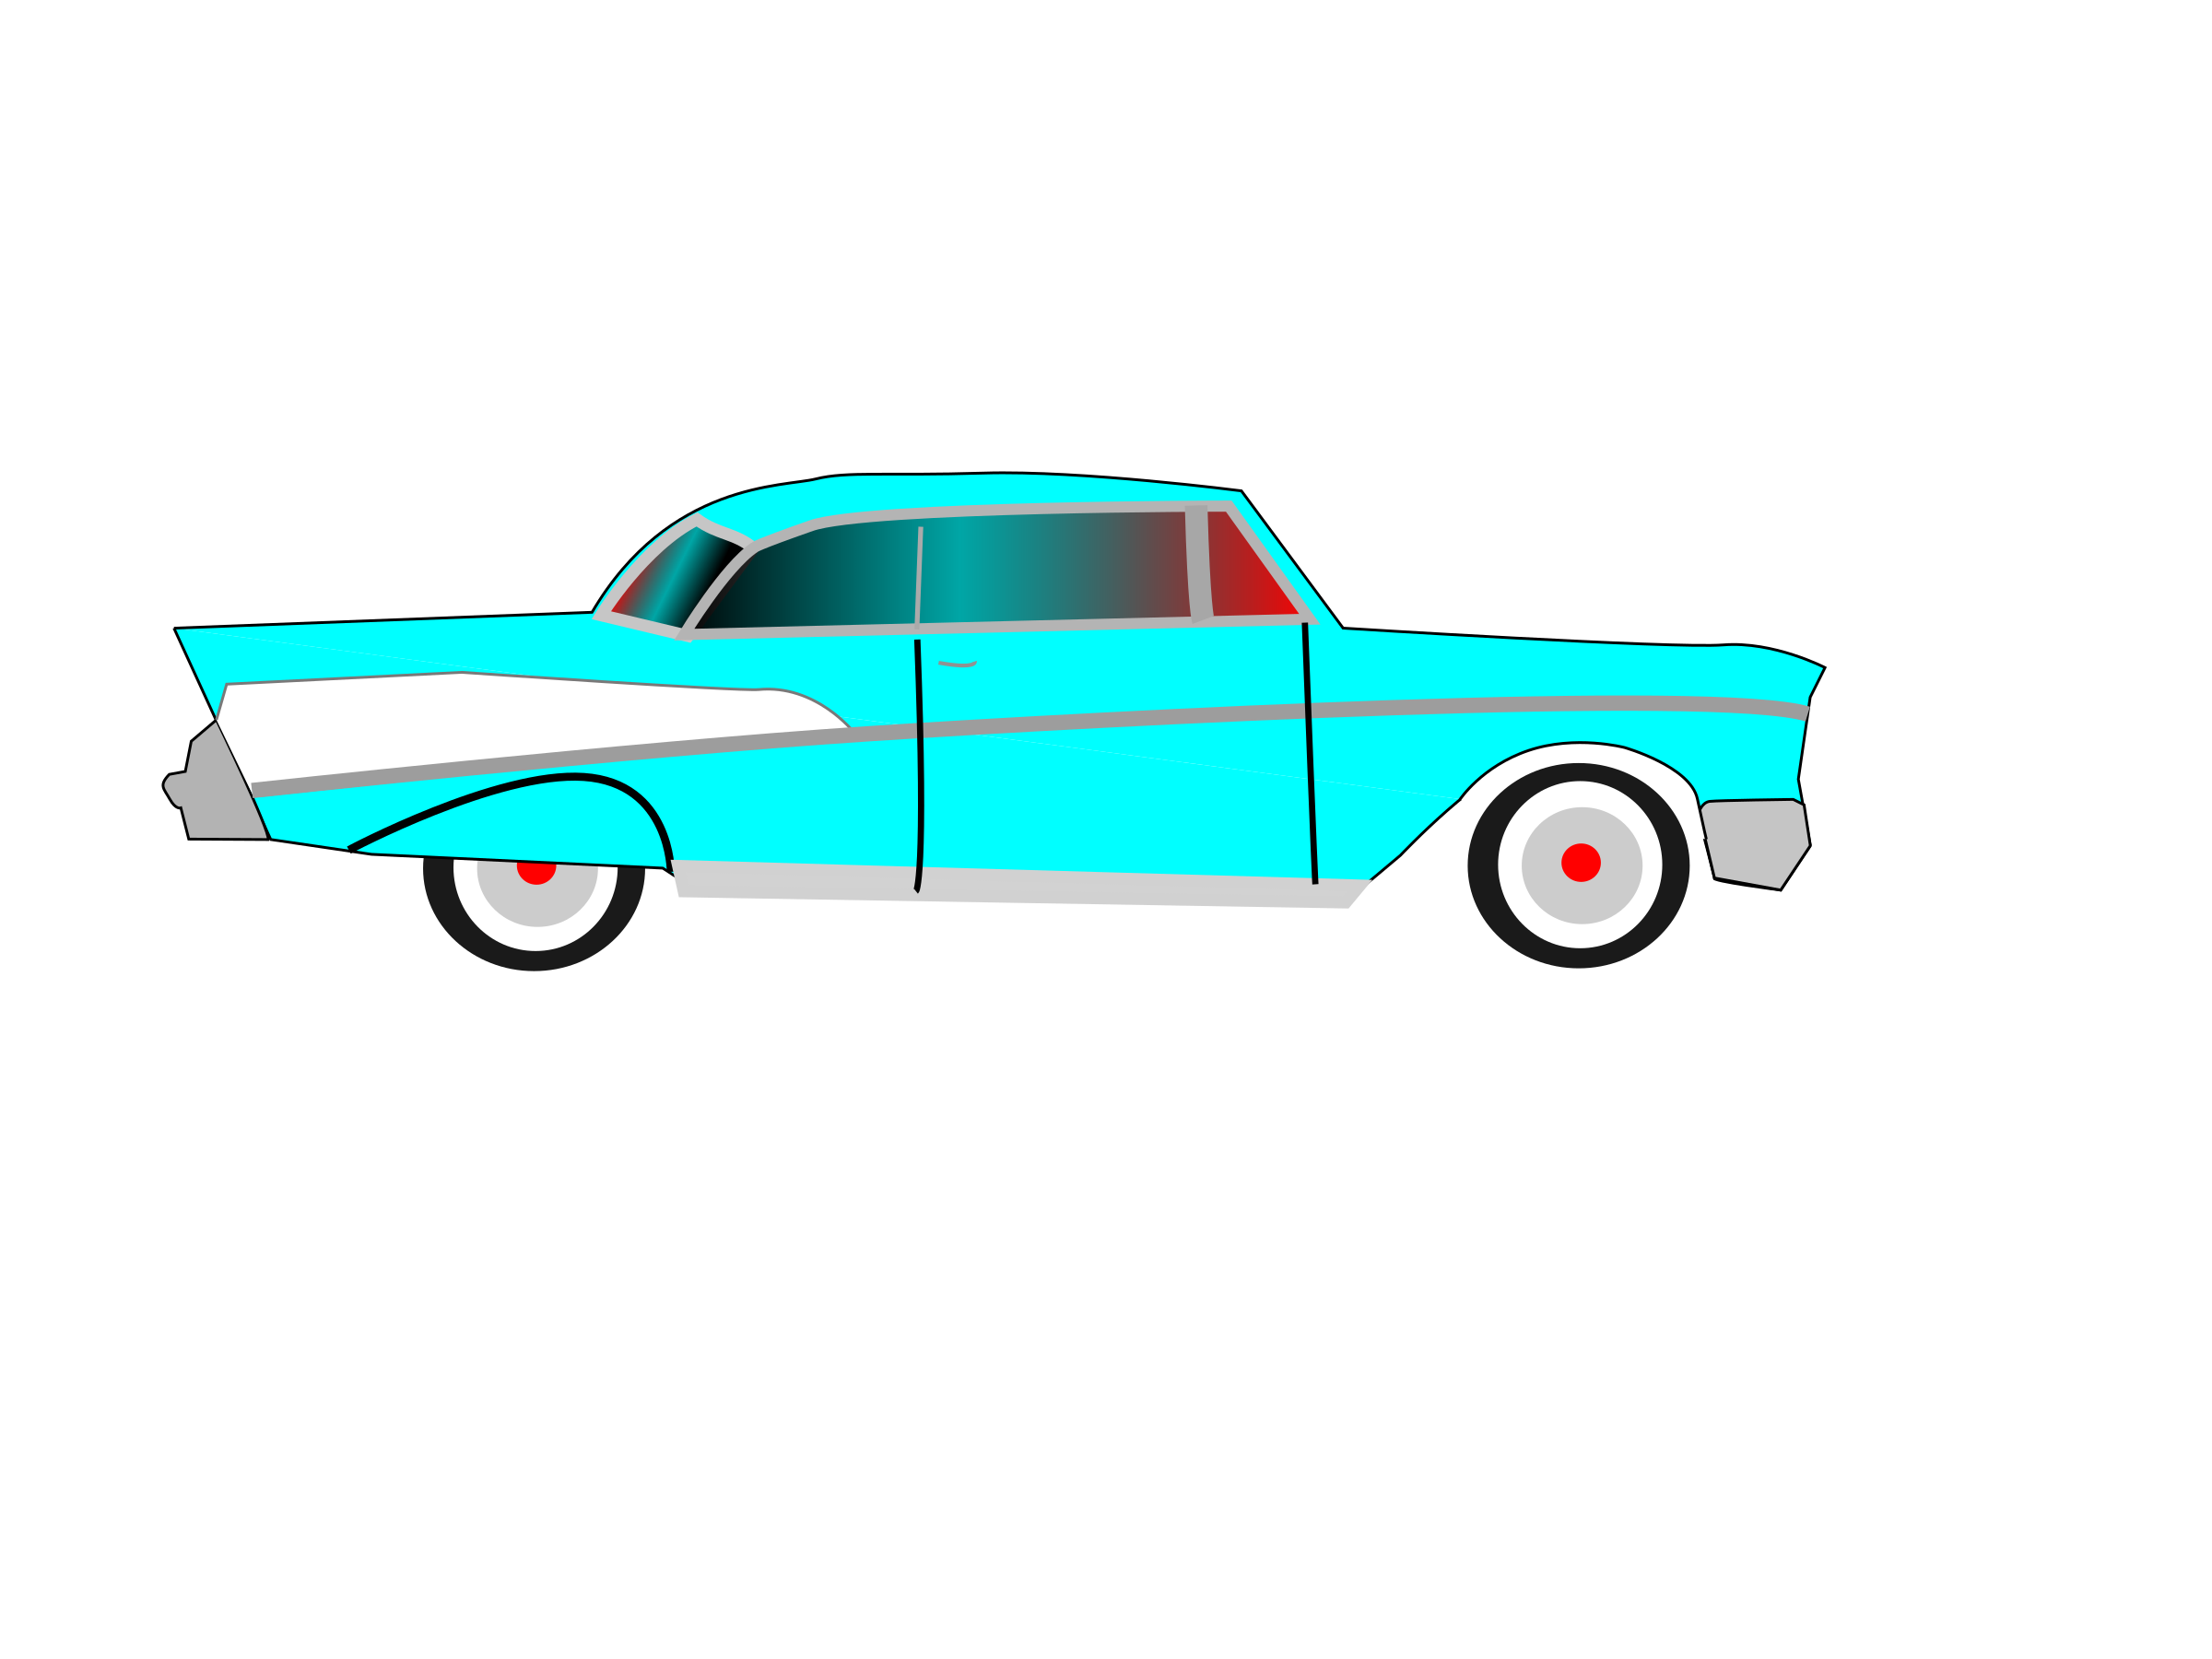 Chevy Bel Air Logo Clipart & Free Clip Art Images #9424.